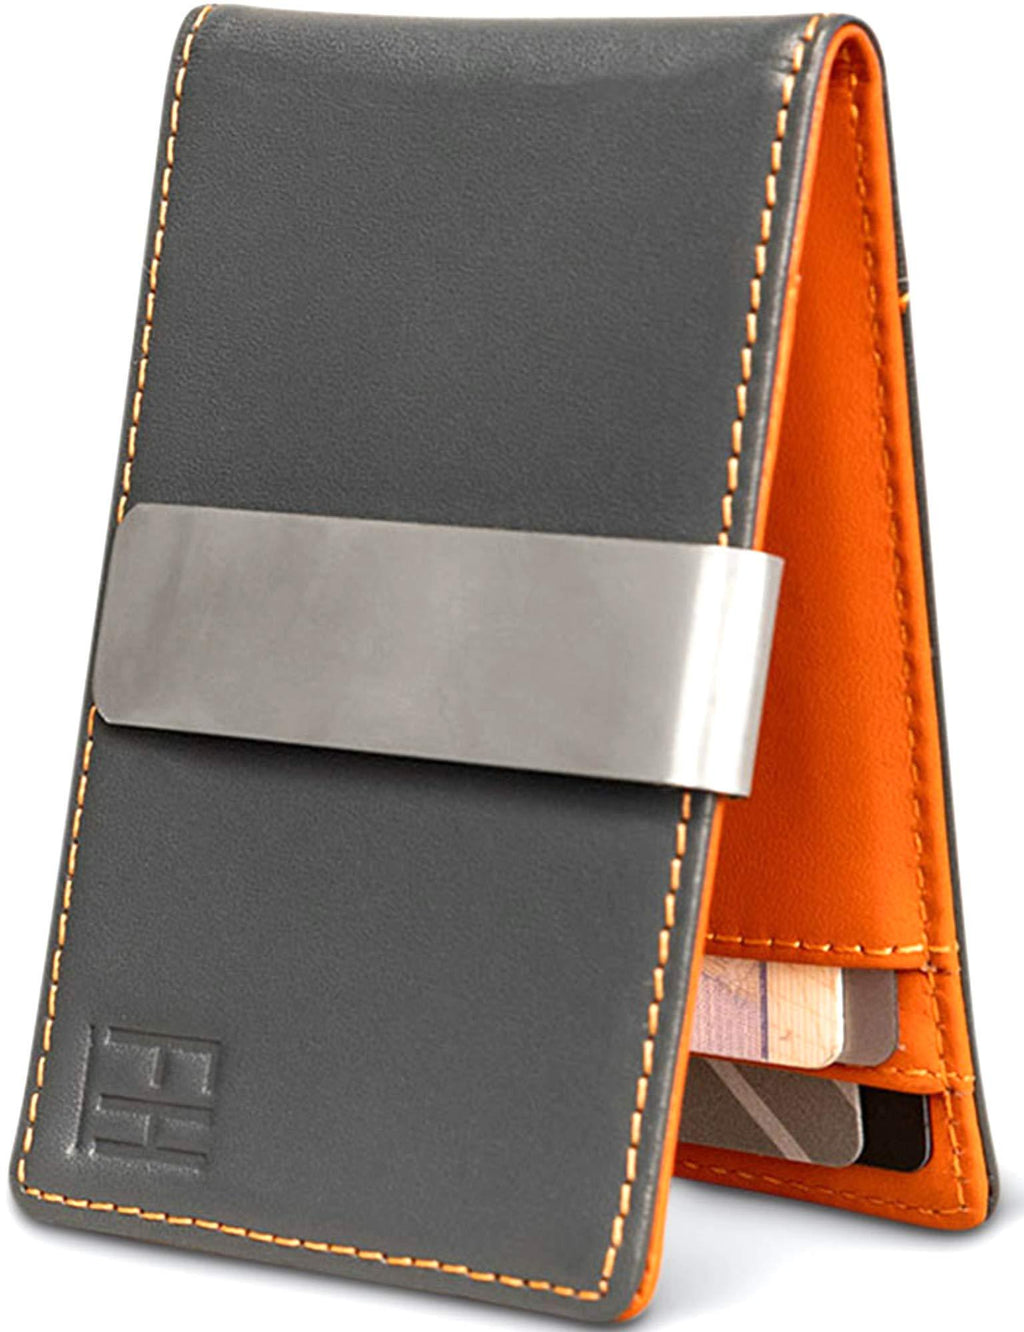 [Australia] - F&H Minimalist Slim Leather Wallet Money Clip Holds 8 Cards Charcoal / Rust 